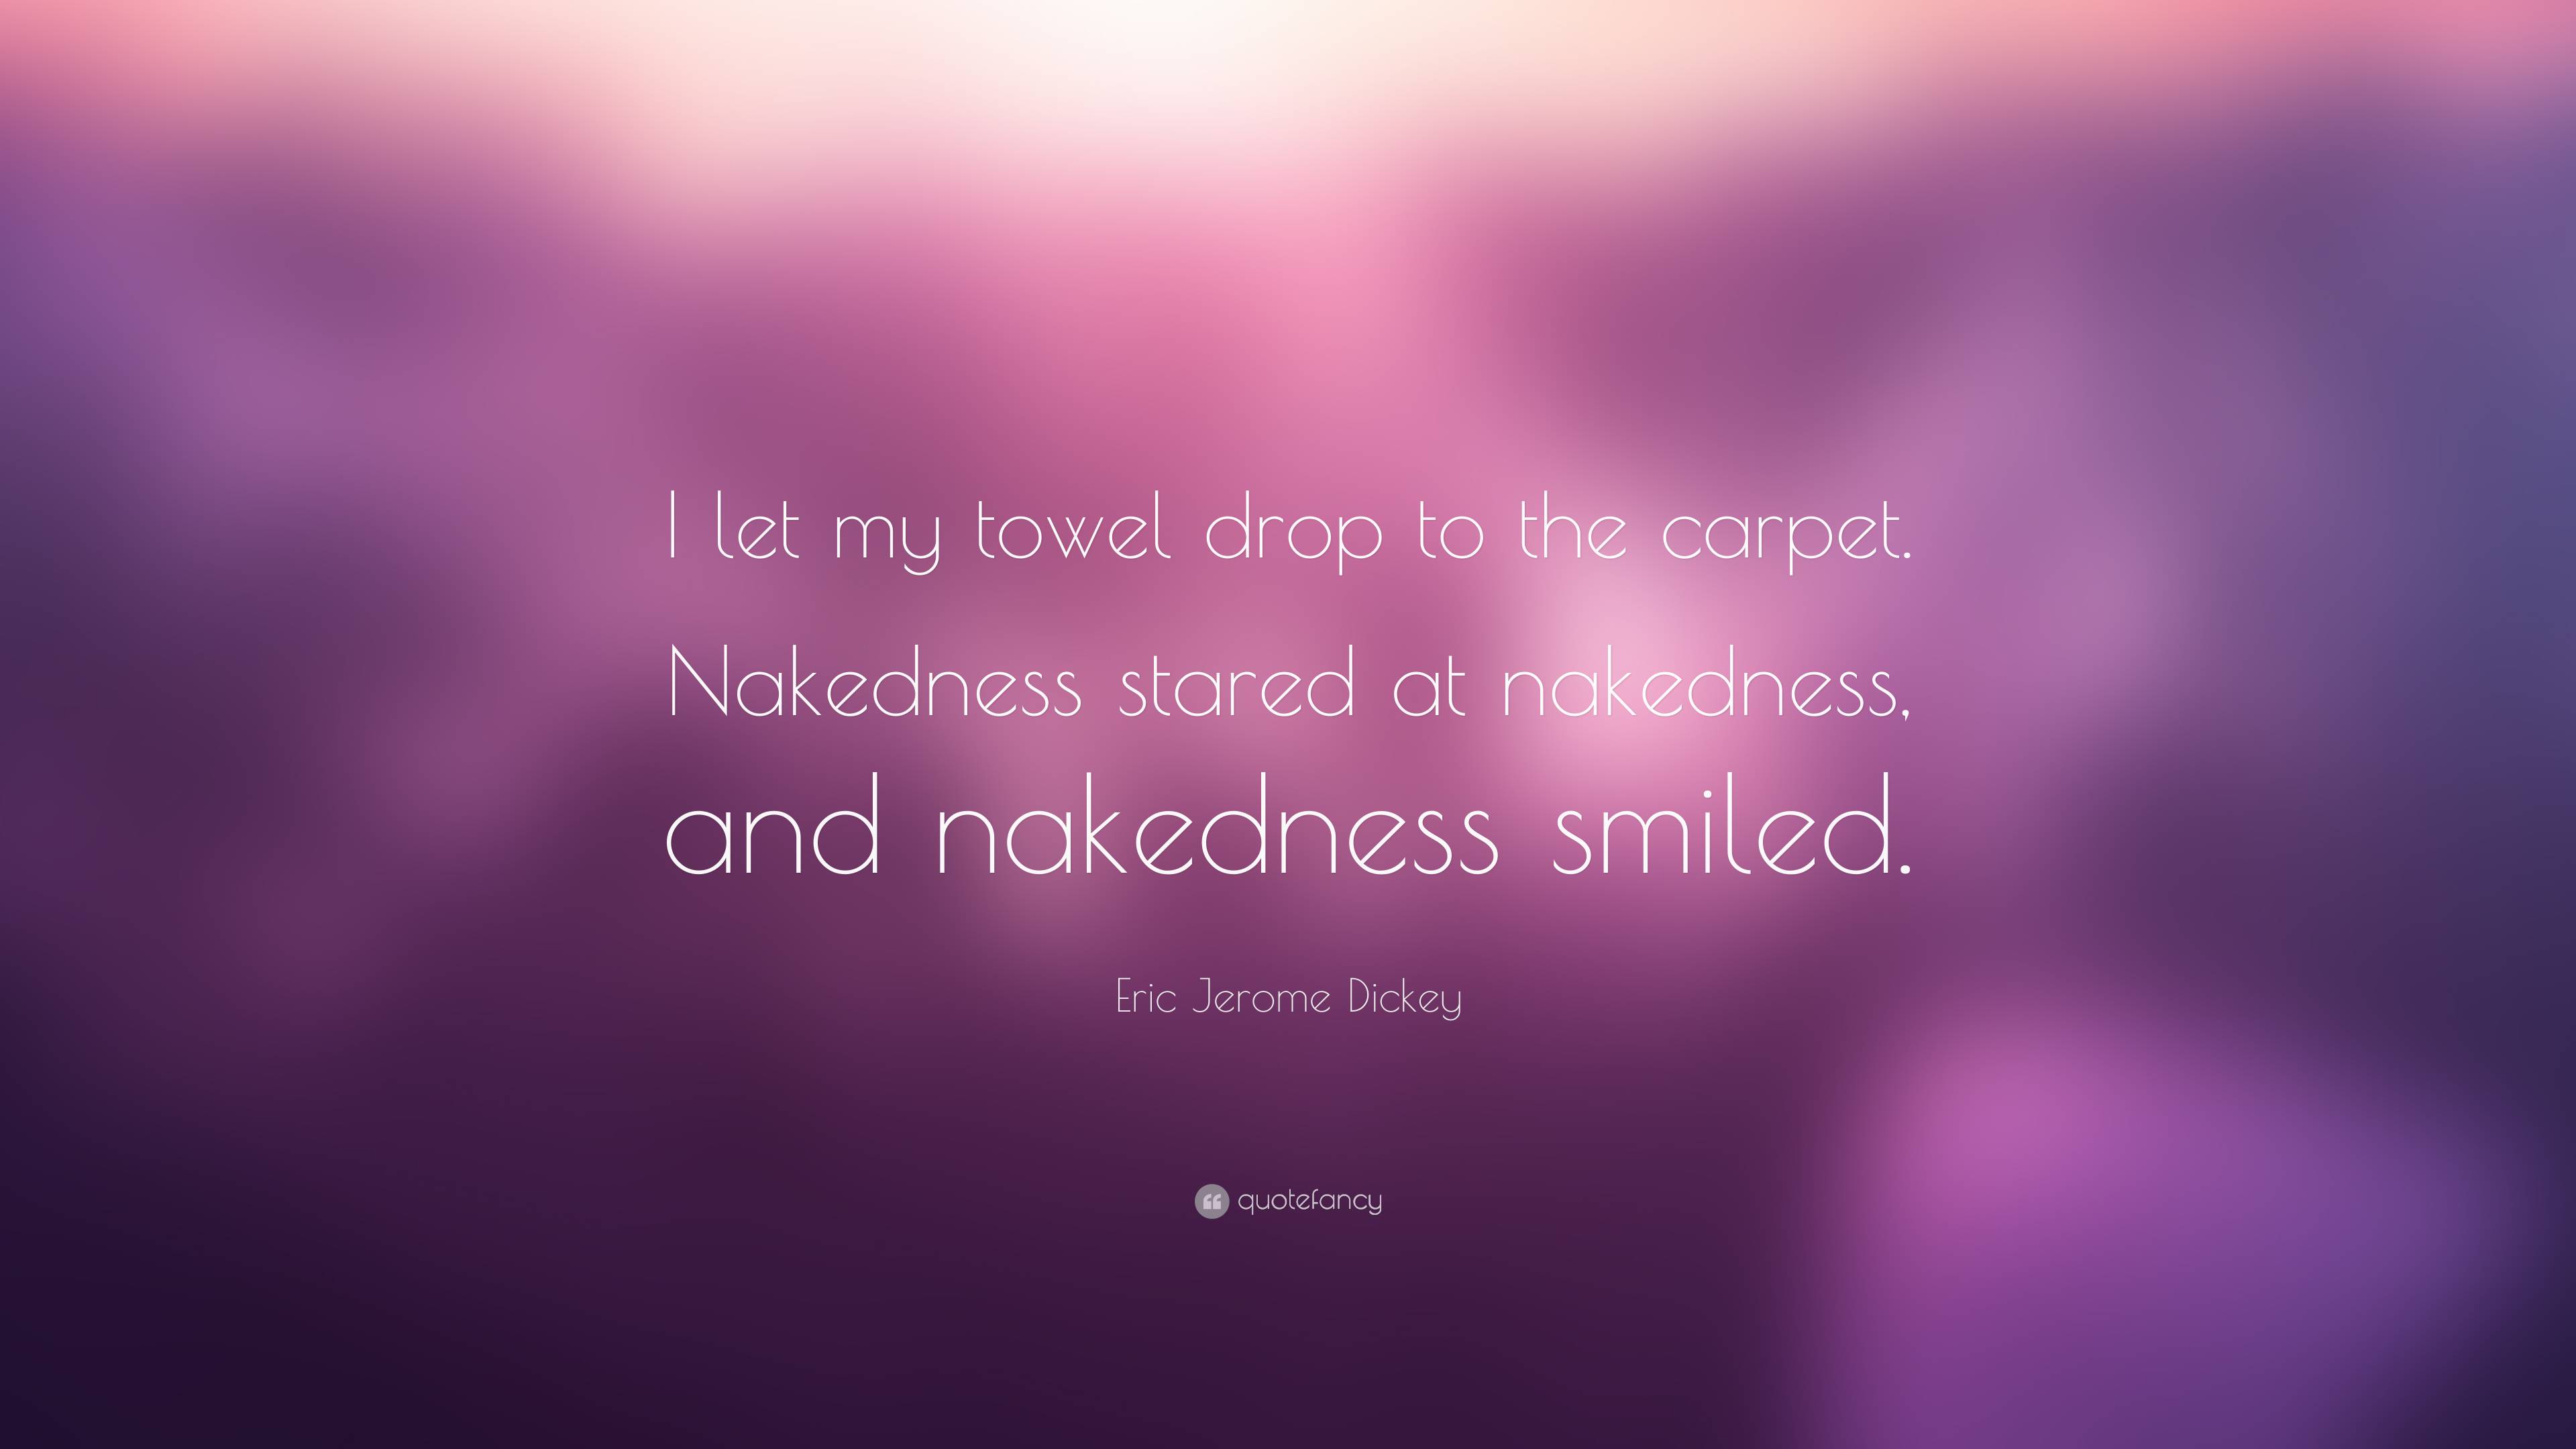 Eric Jerome Dickey Quote: “I let my towel drop to the carpet. Nakedness ...